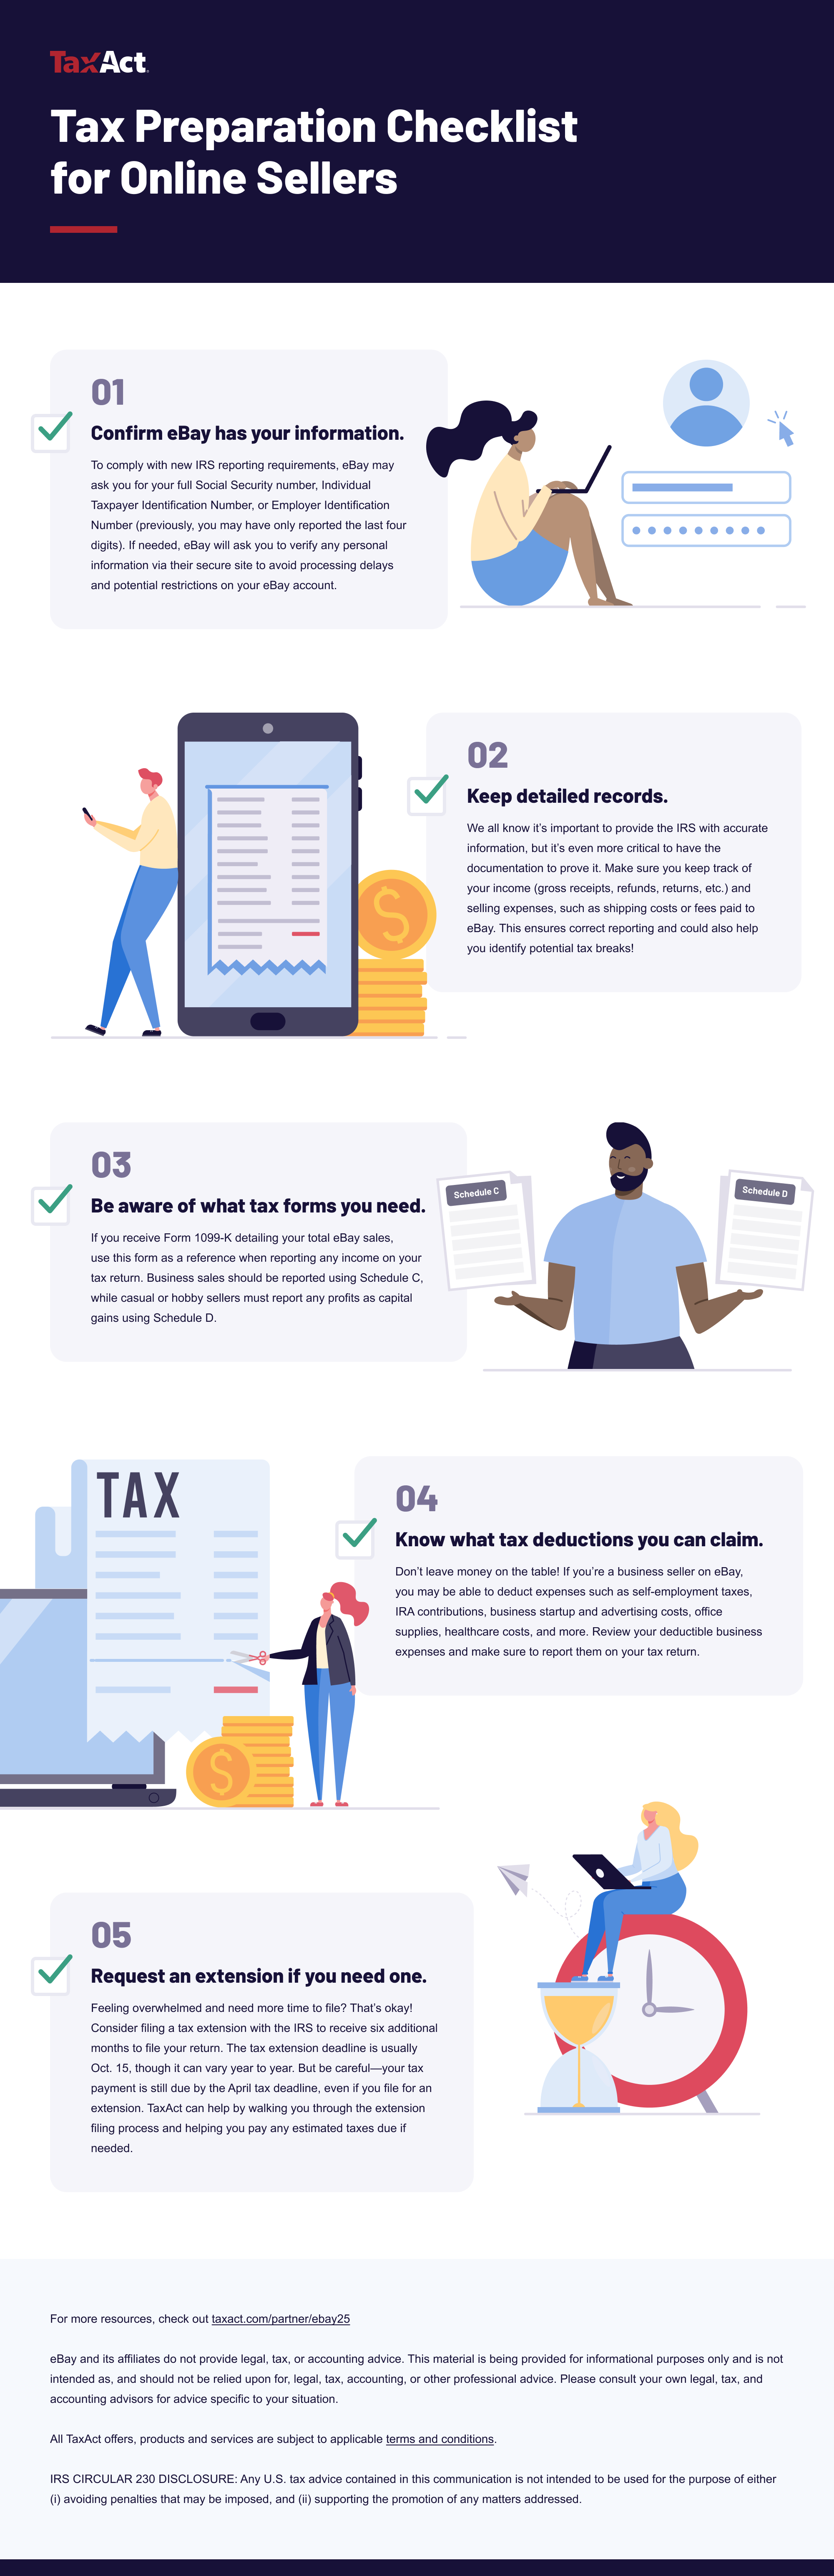 An infographic with tax preparation checklist for online sellers.